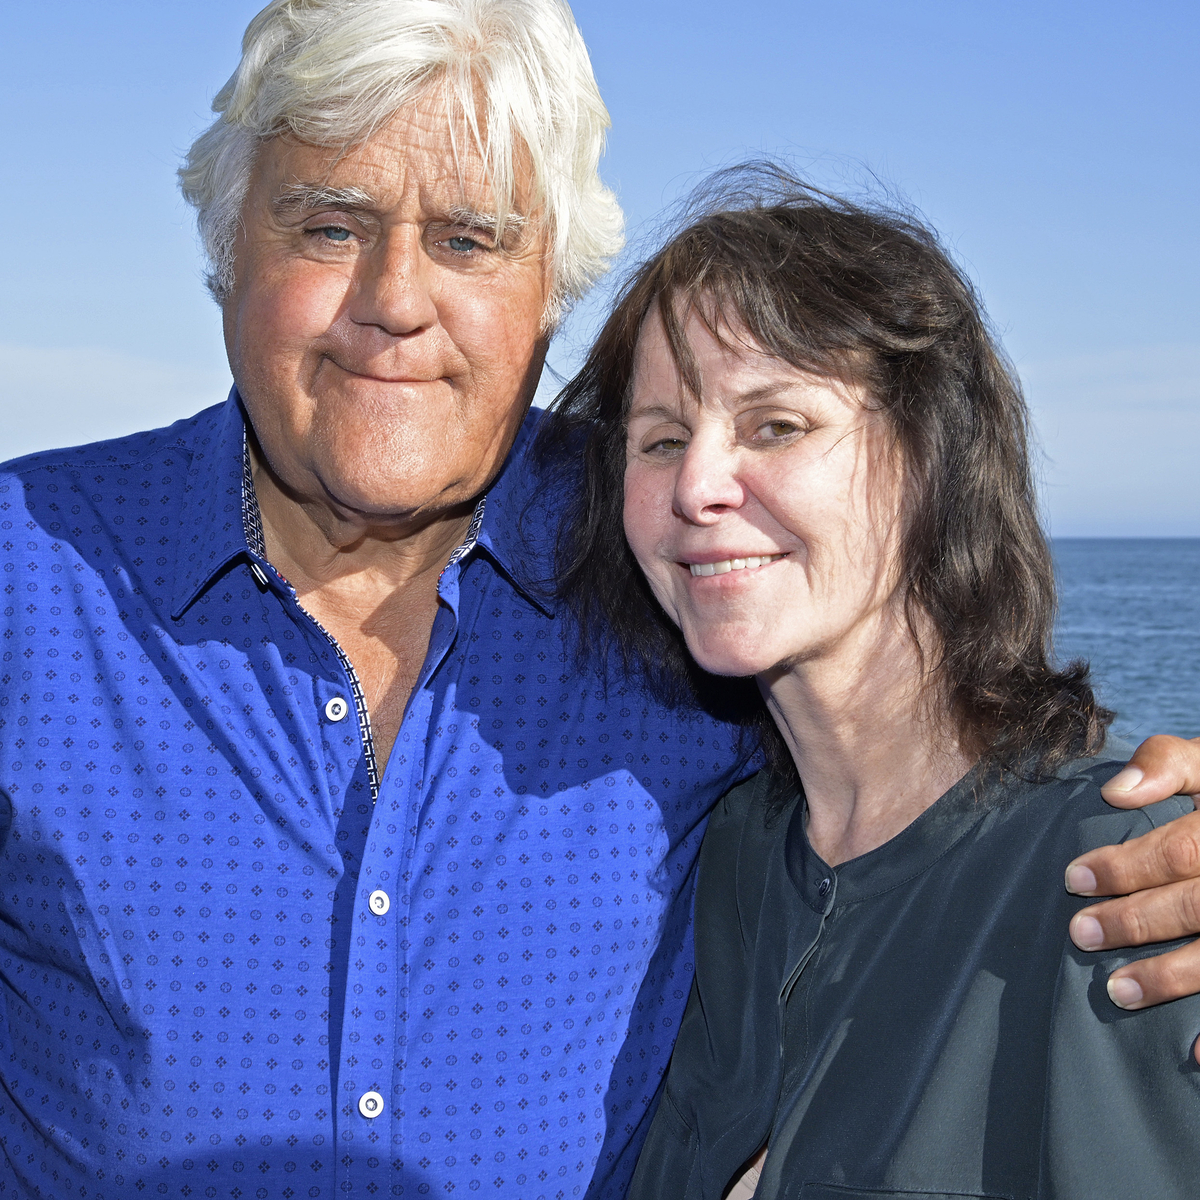 Jay Leno’s Wife Does Not Recognize Him Due to Dementia, Says Lawyer